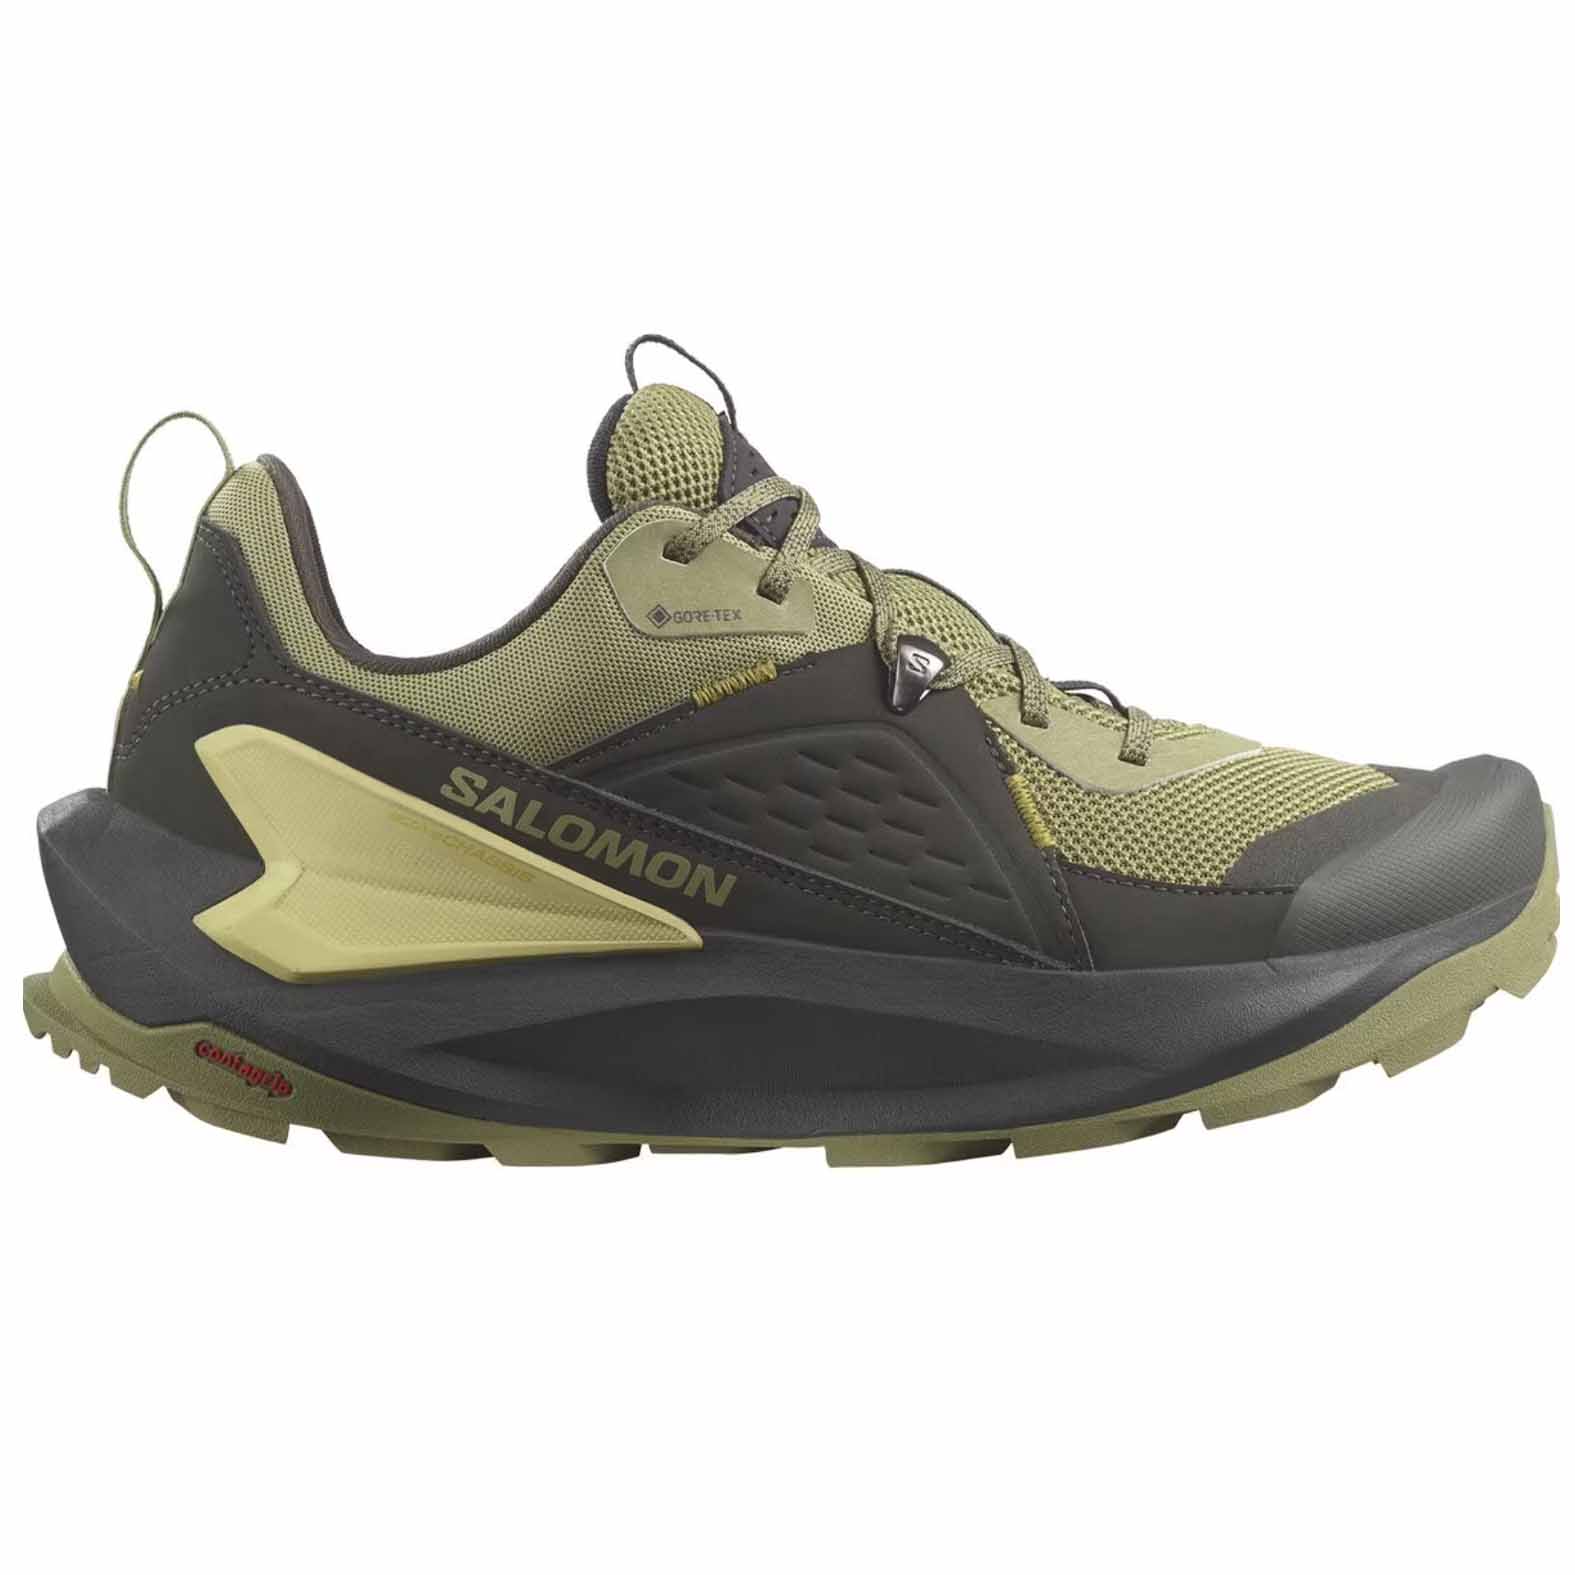 Elixir Gore-Tex Hiking Shoes in green and black